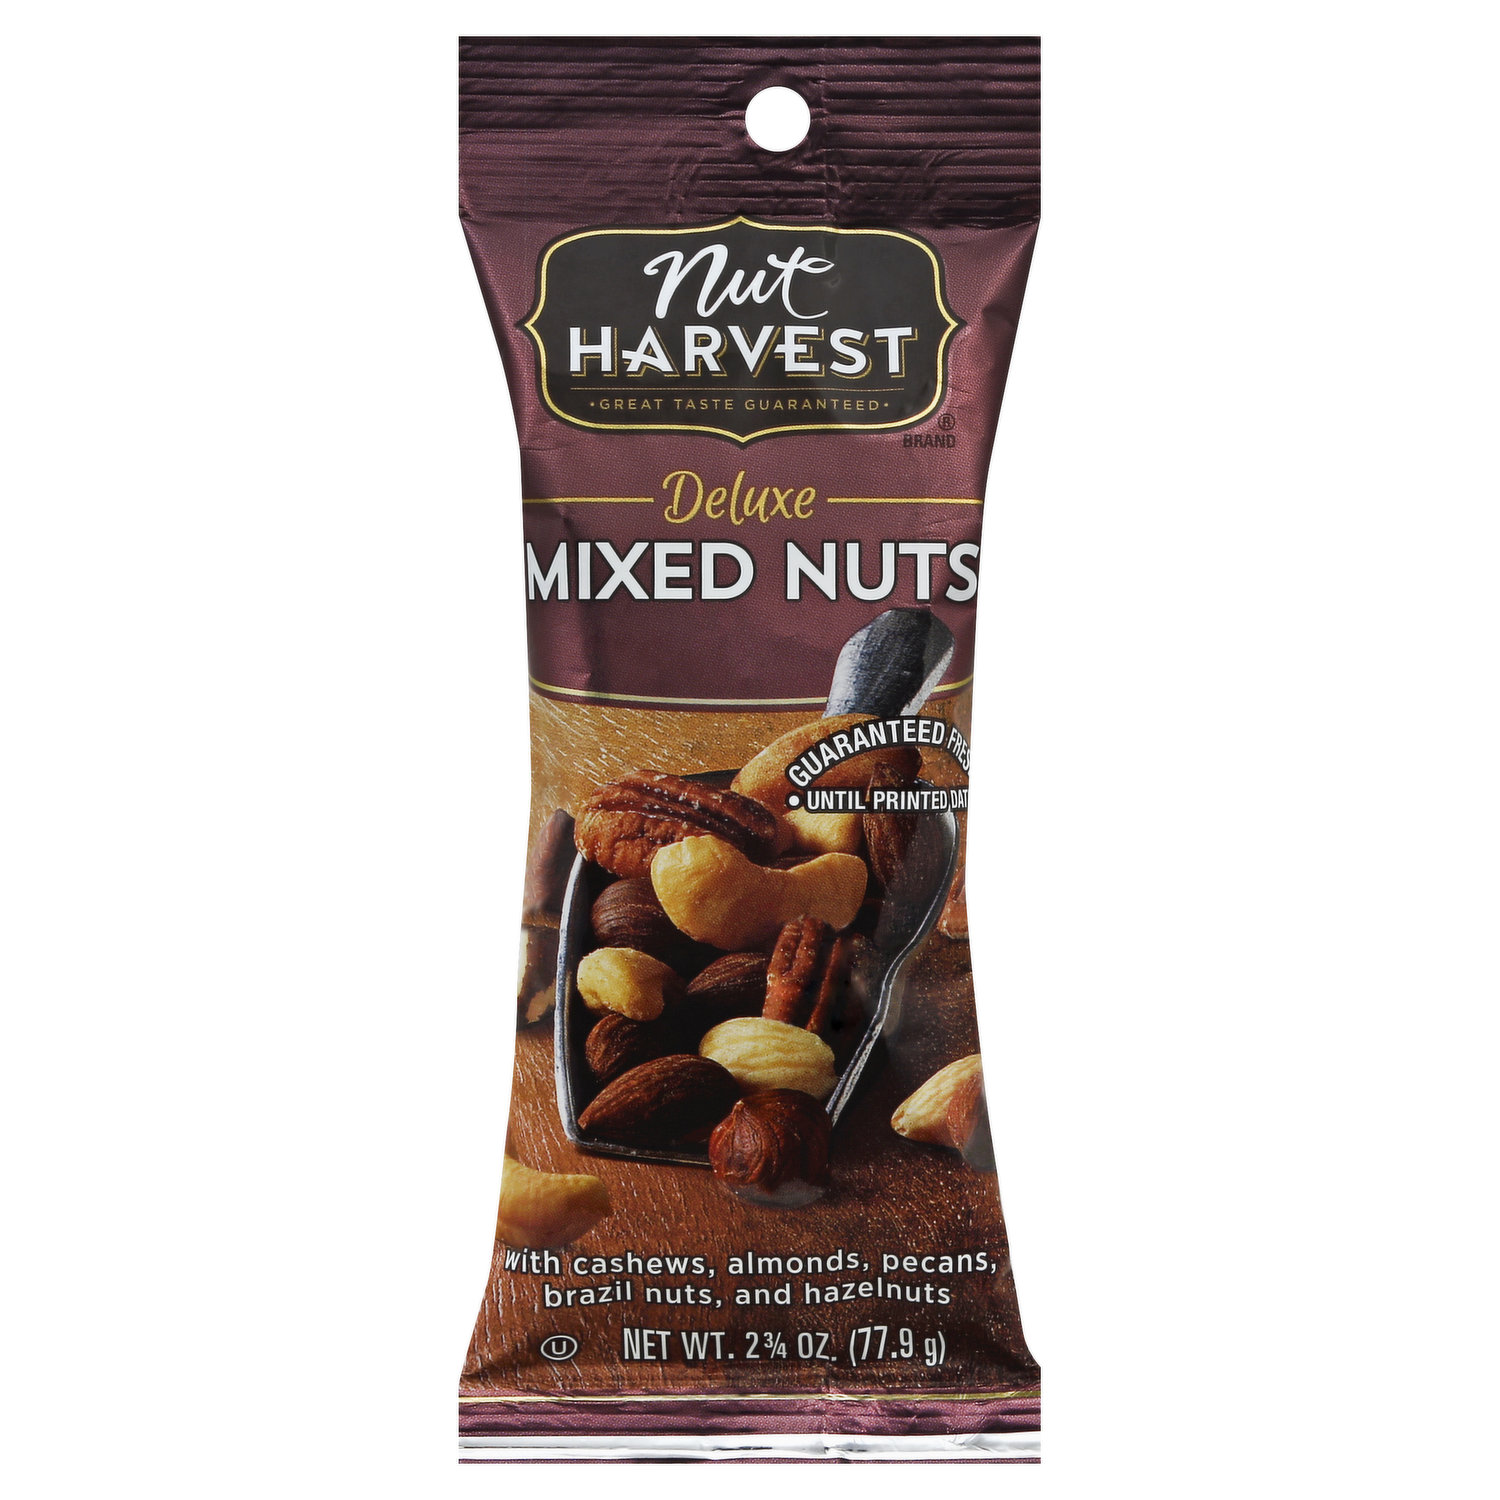 Rufus Teague BBQ Honey Roasted Mixed Nuts